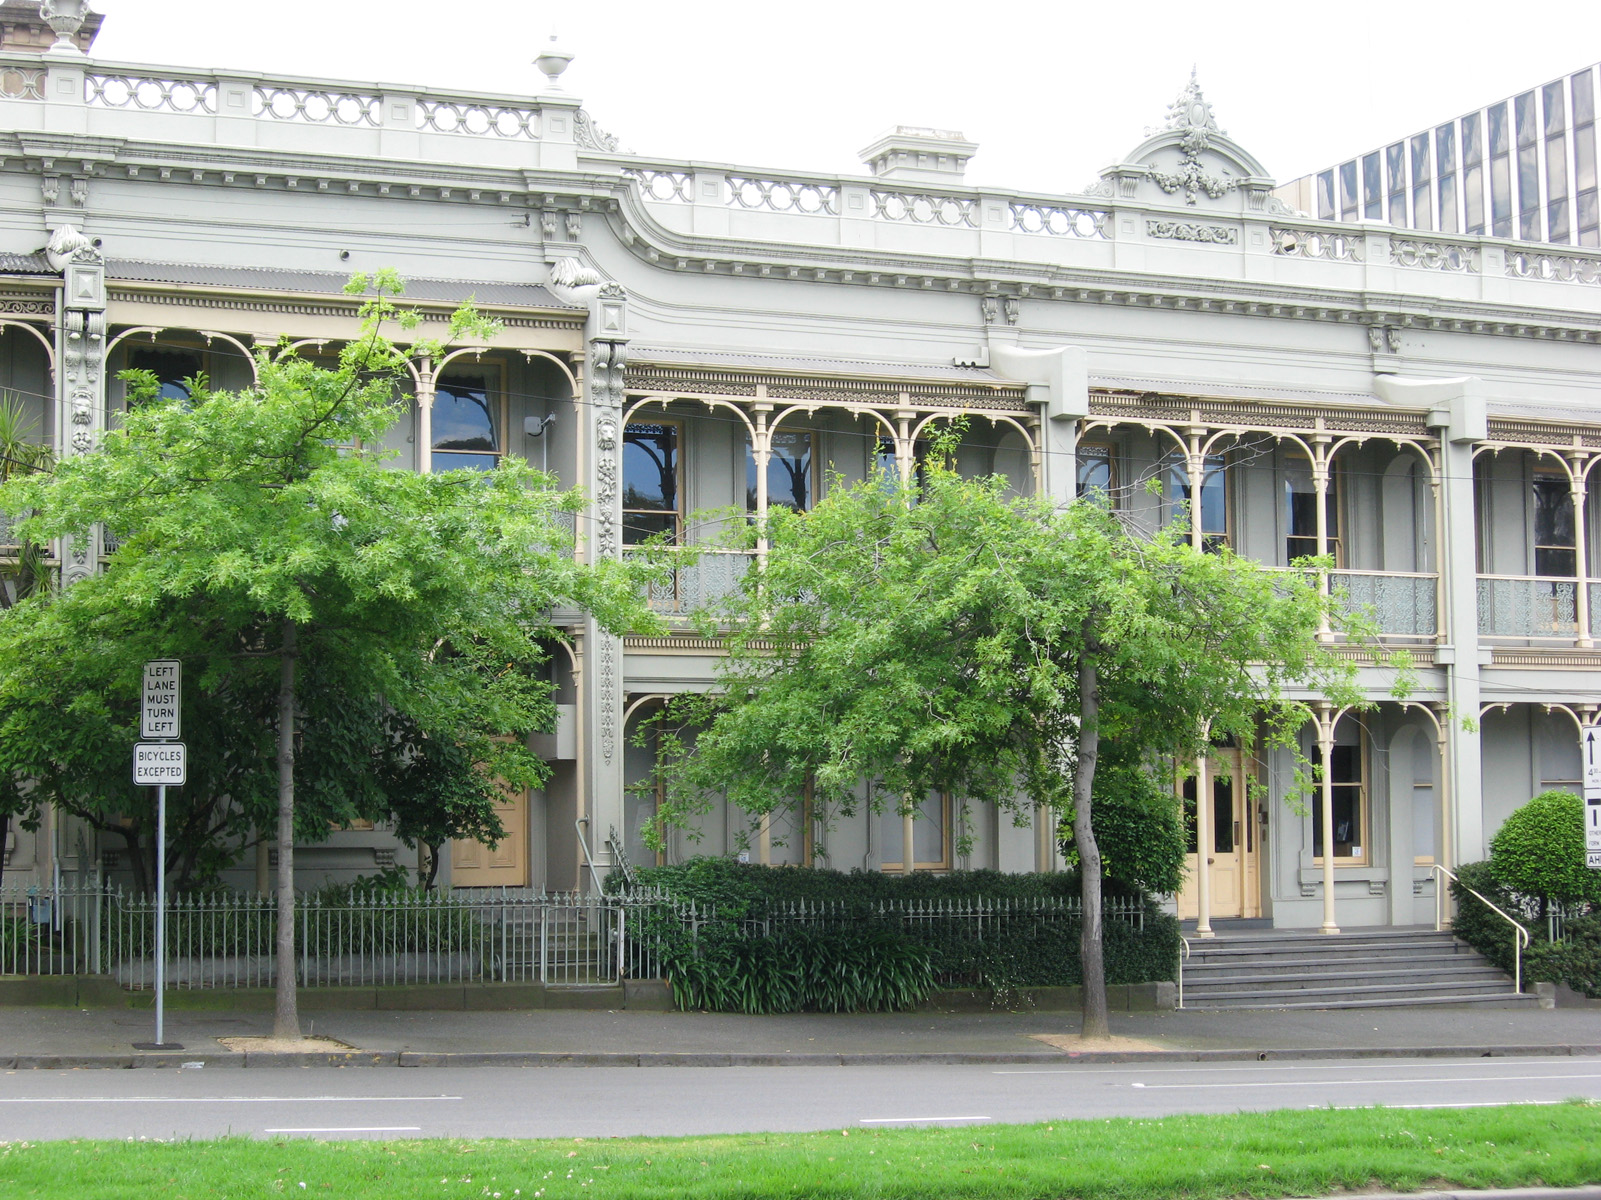 Typical Australian/Victorian houses